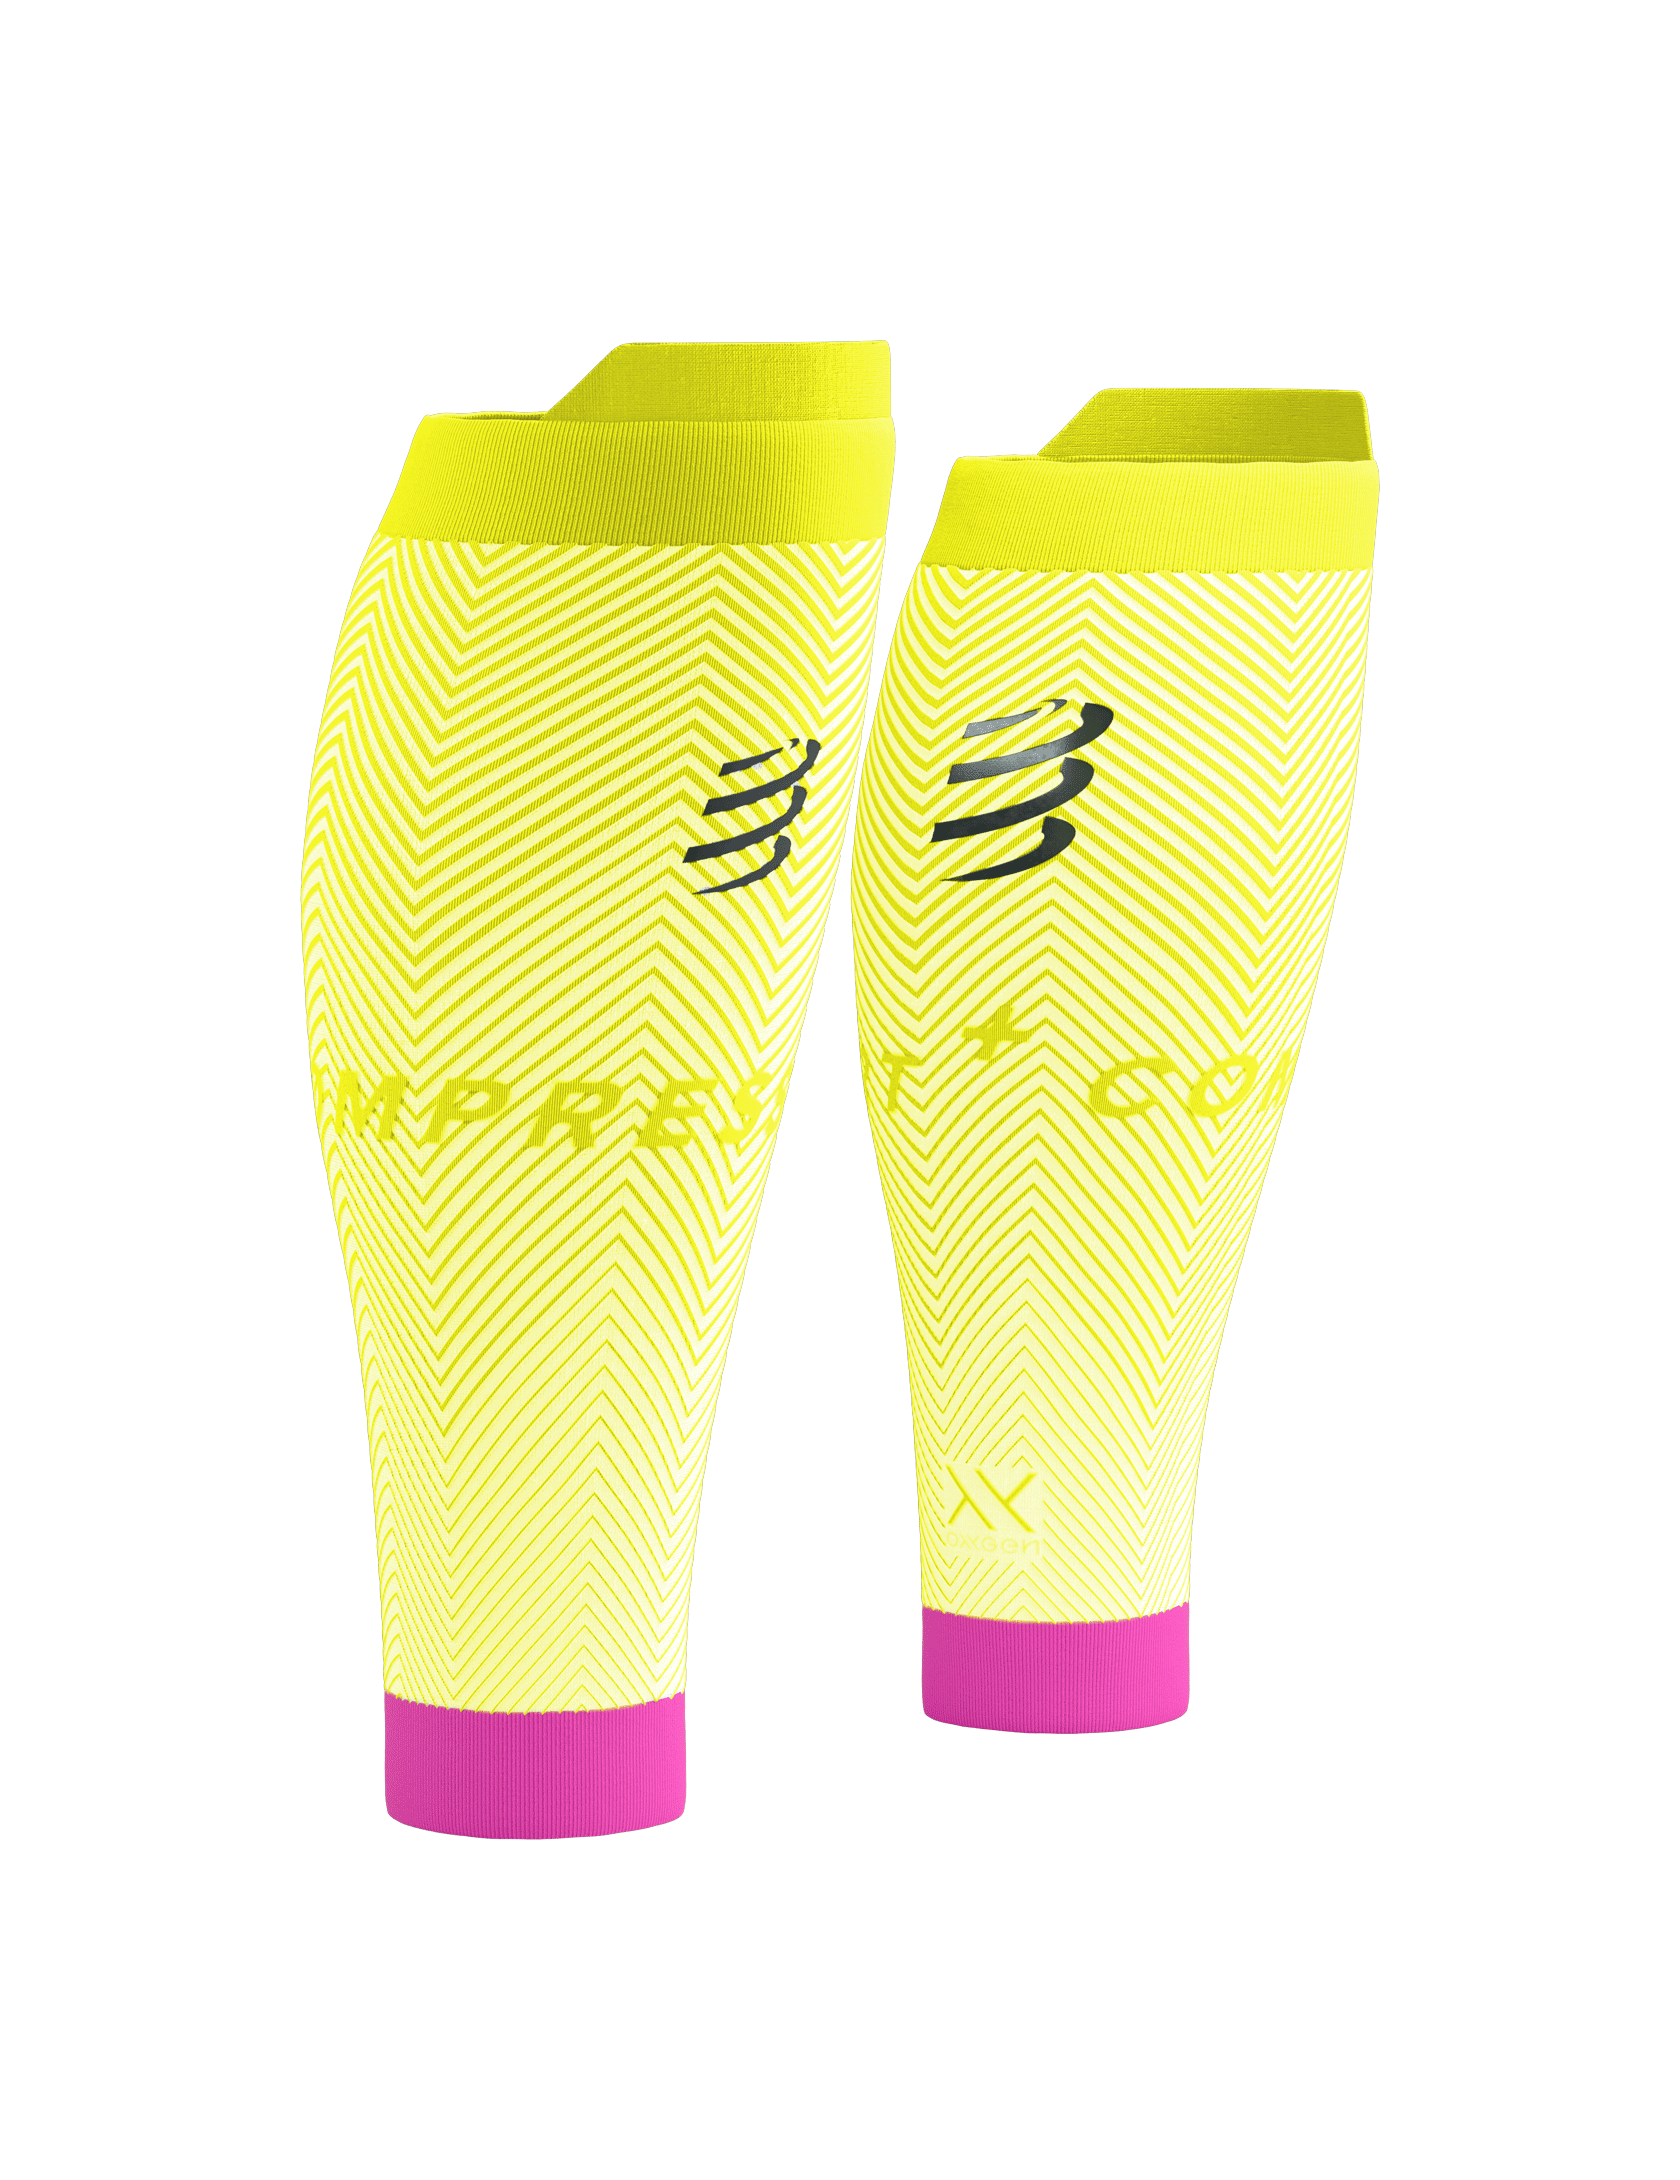 R2 Oxygen - Safe Yellow, Compression calf sleeves